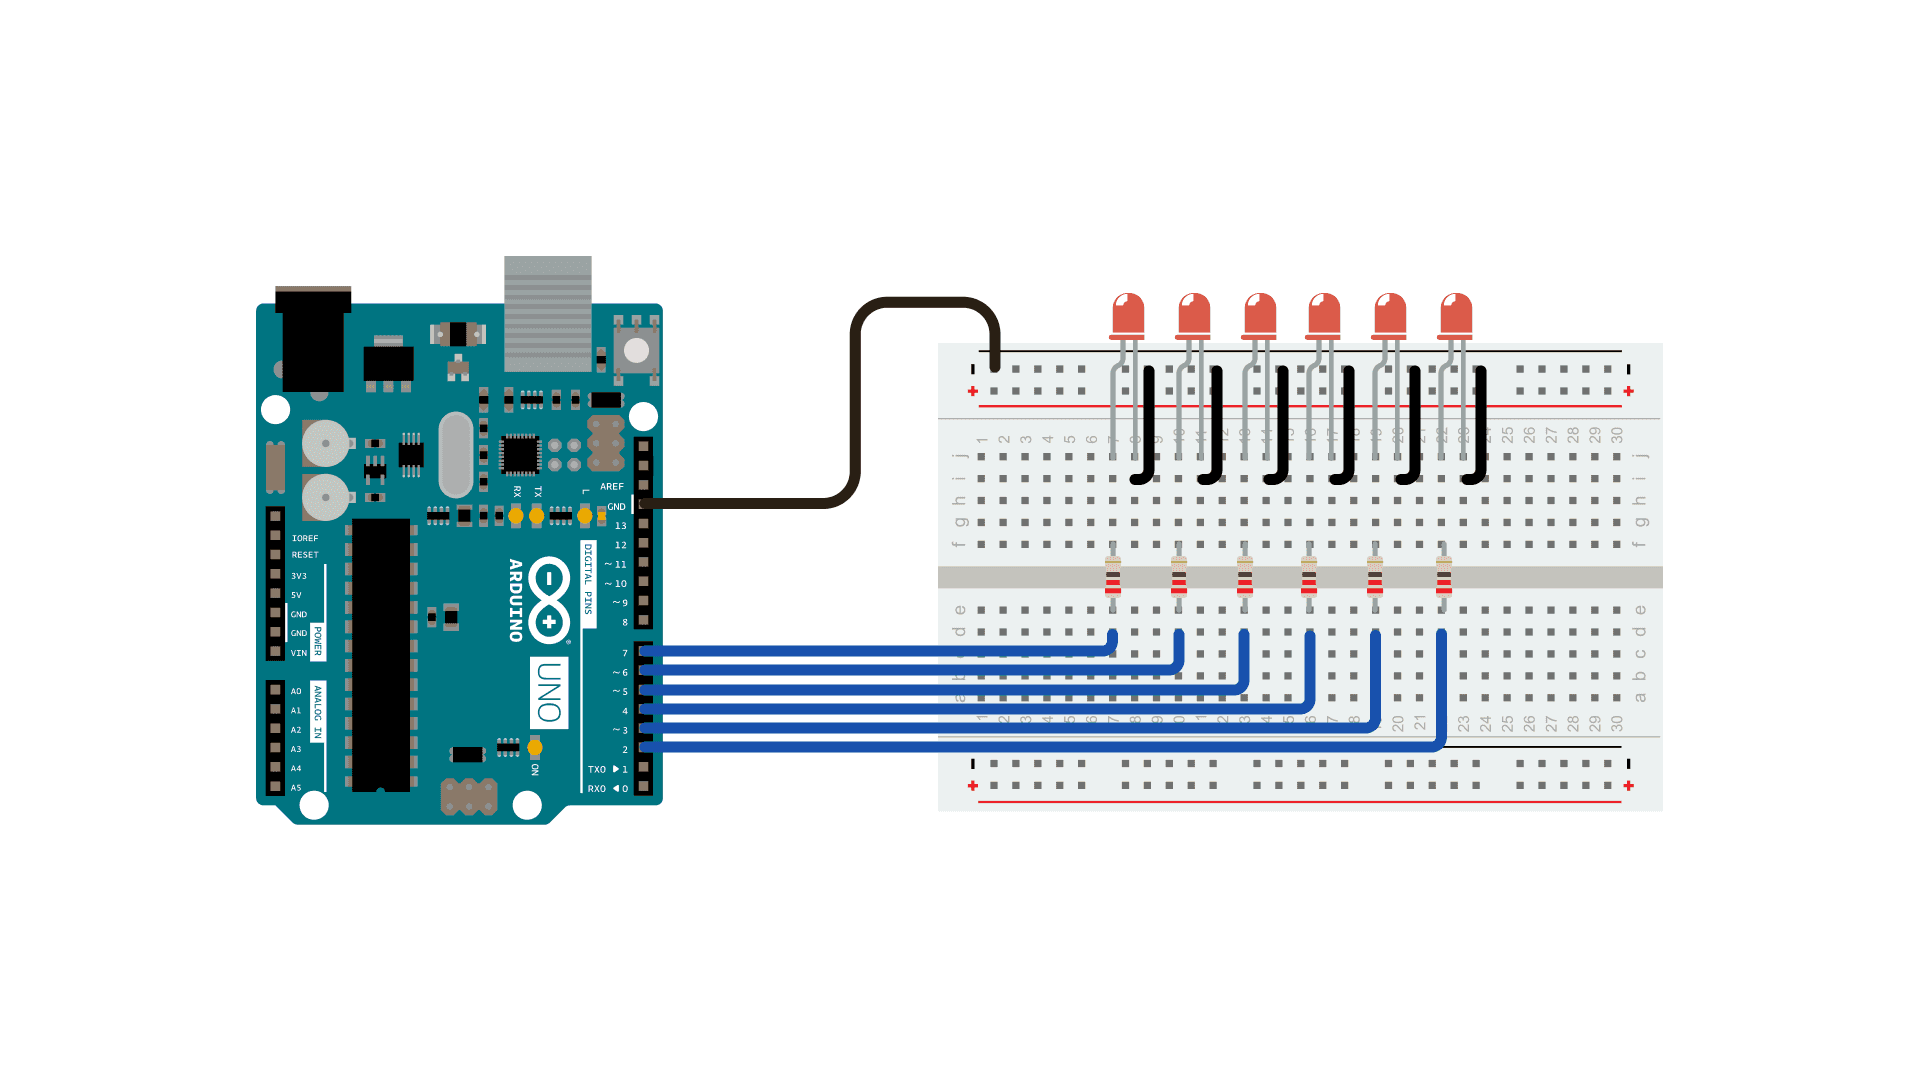 Getting Started with the Arduino - Controlling the LED (Part 2)